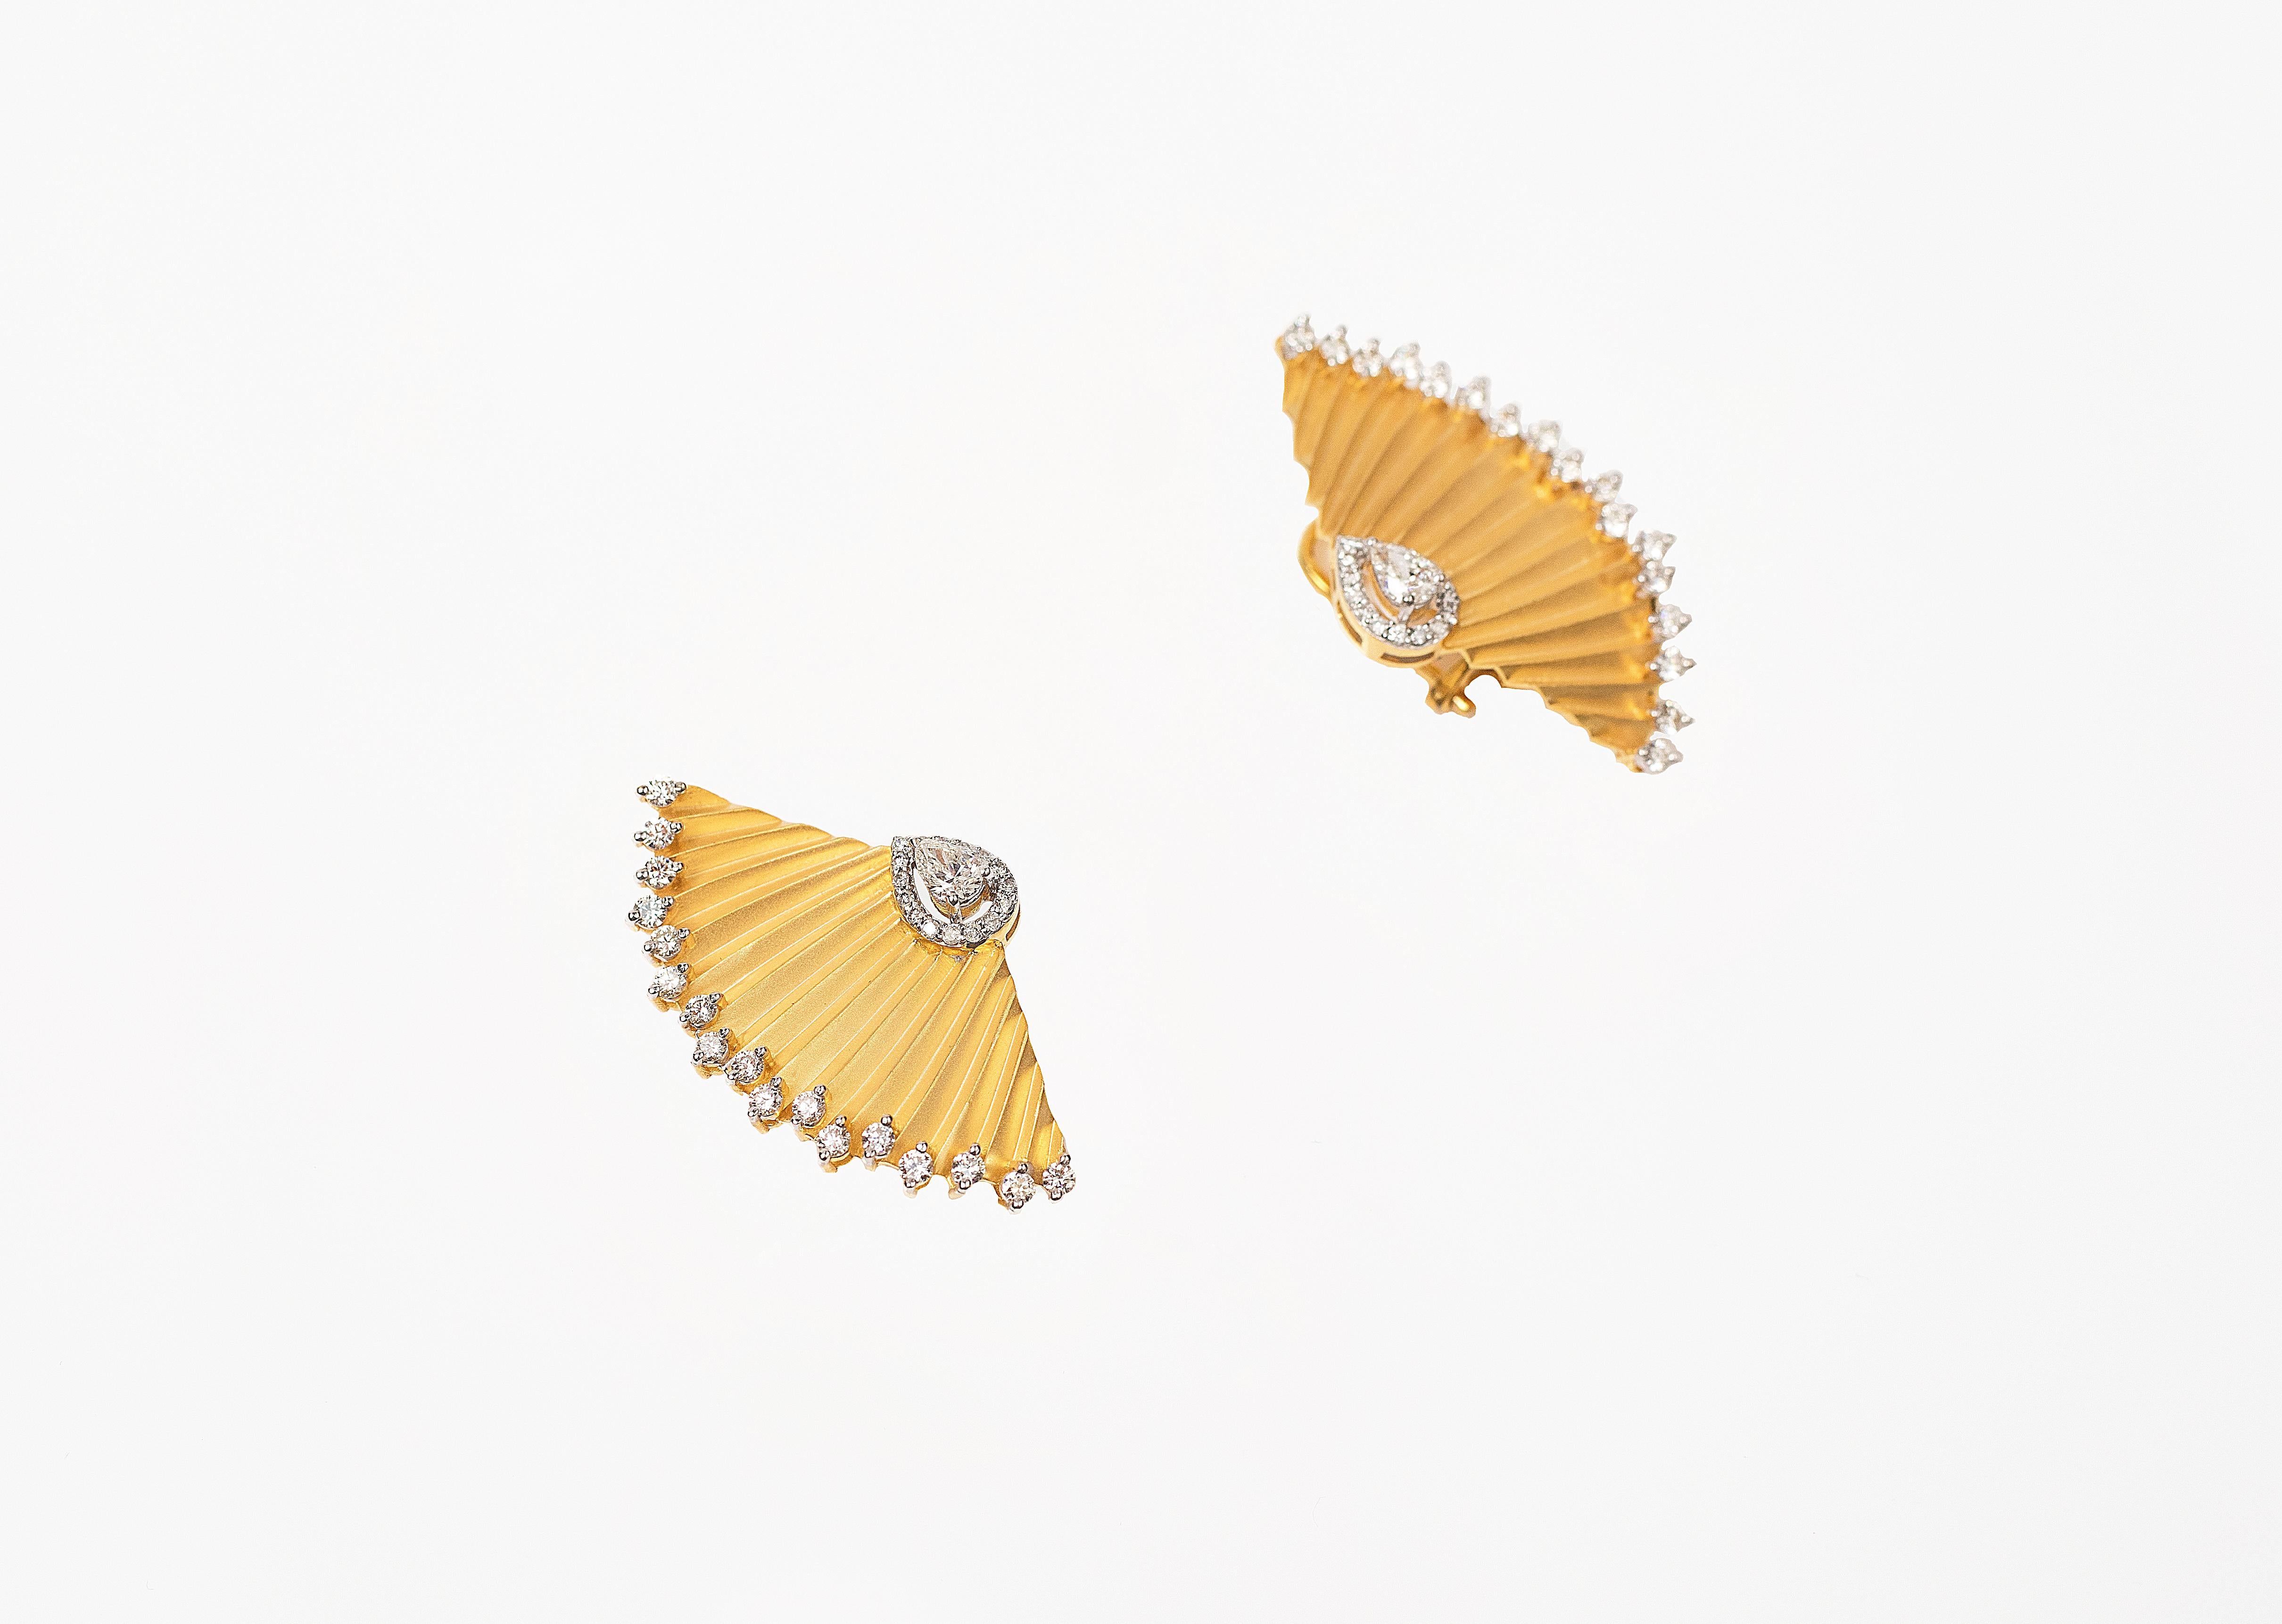 Handcrafted Contemporary Earring in 18K Yellow Gold studded with Round and Pear Shape Diamond.
Gold Weight - 17.622 gms
Diamond Clarity - Vs-Si
Diamond Colour - G
Post and Clip System 